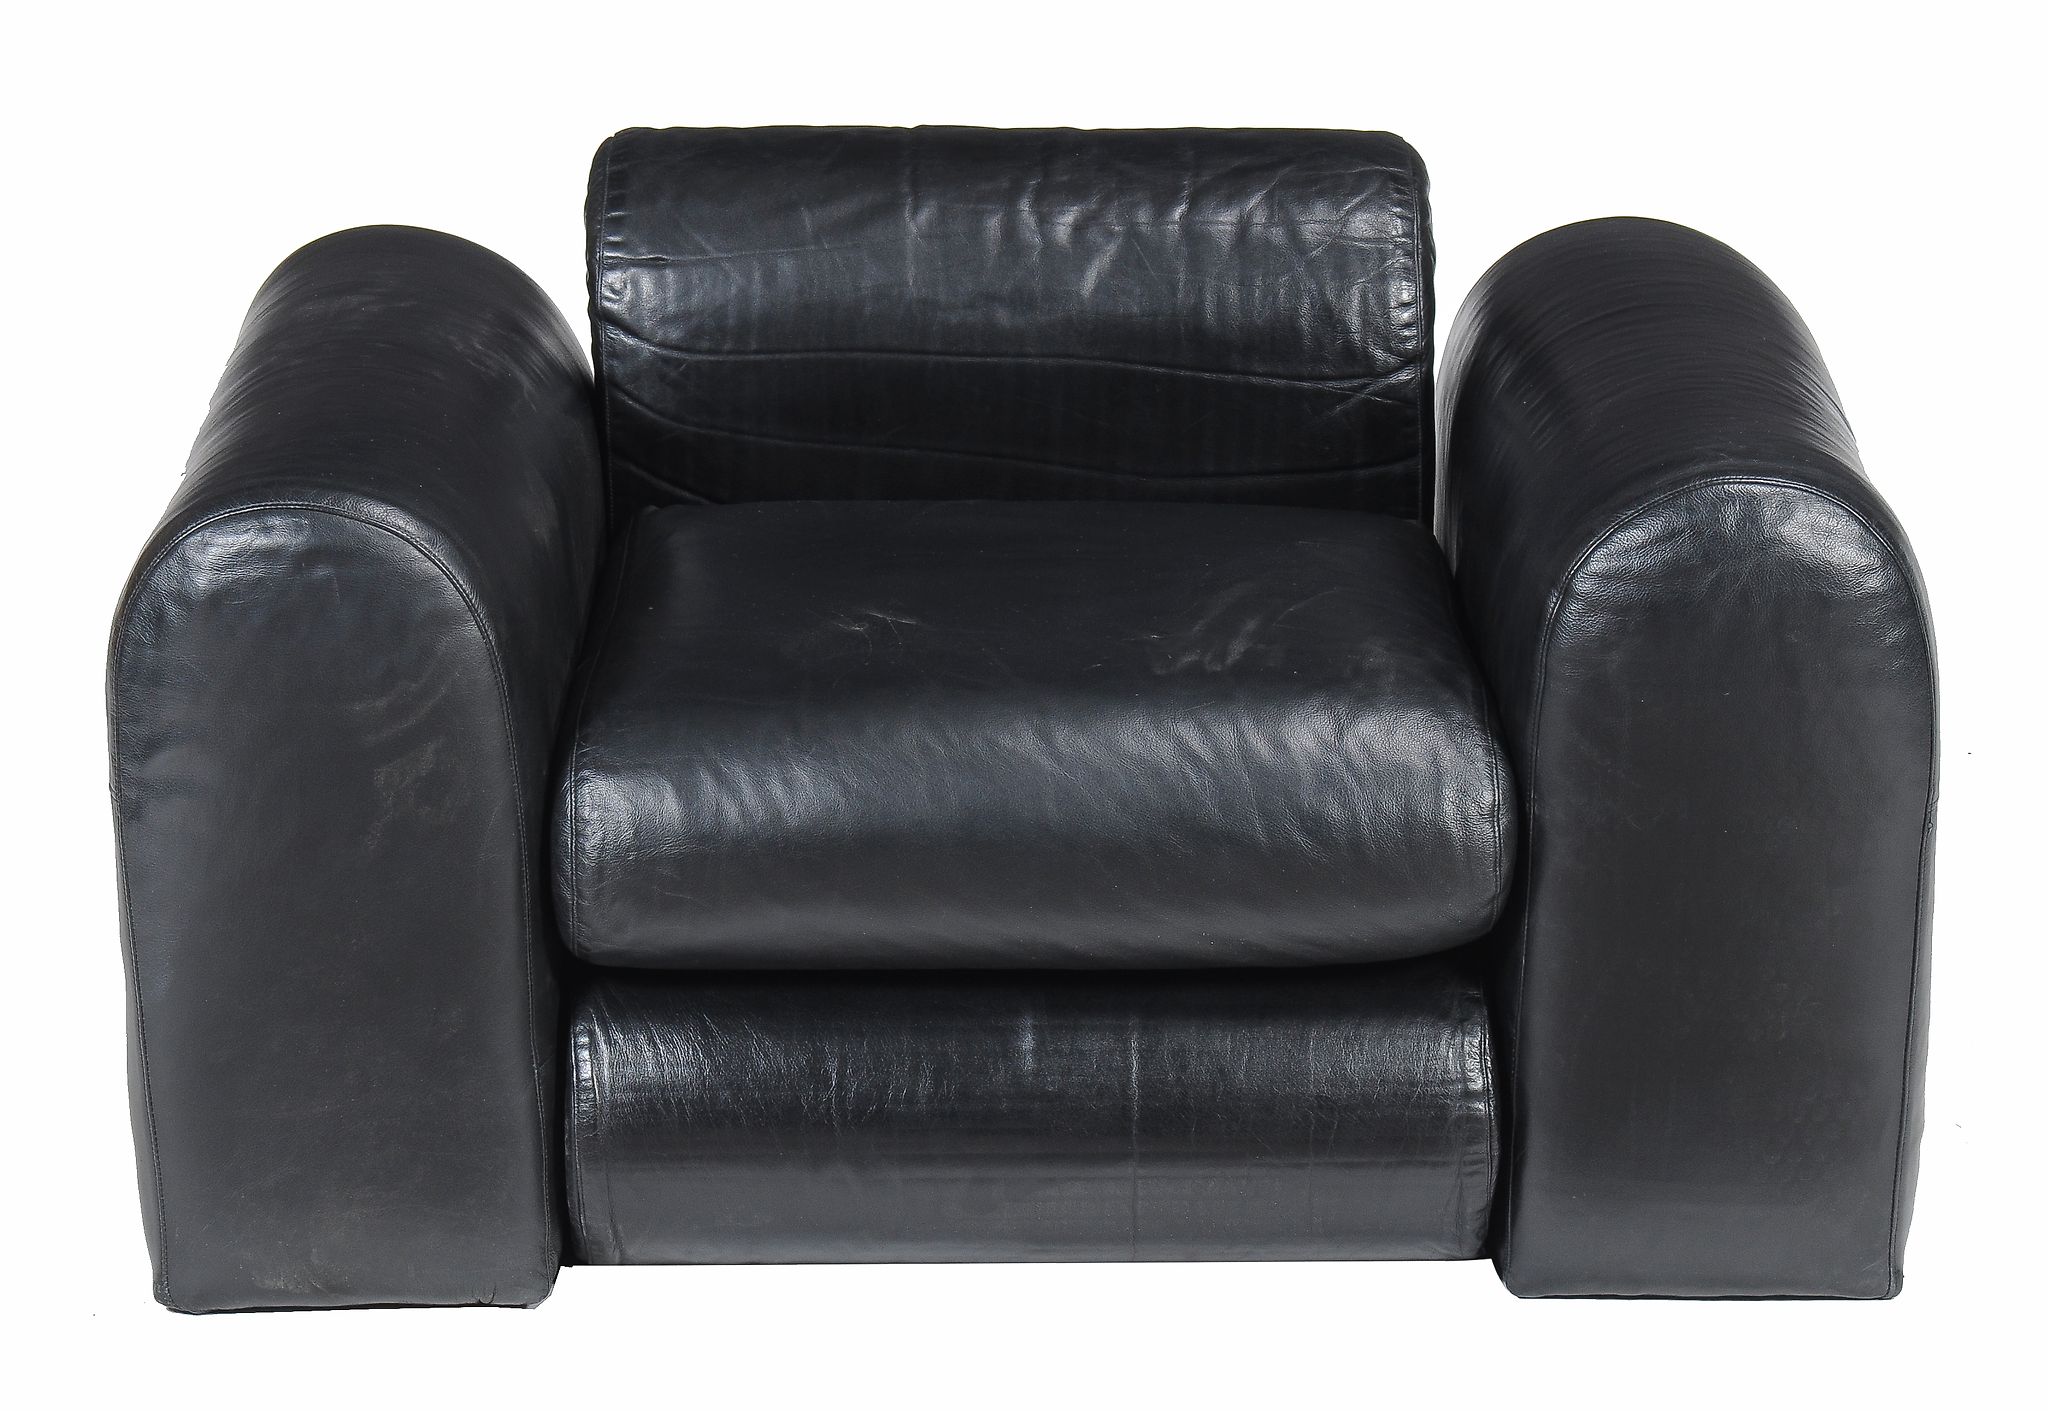 A vintage black leather upholstered lounge armchair, 1960s, attributed to Apple Designs, 64cm high